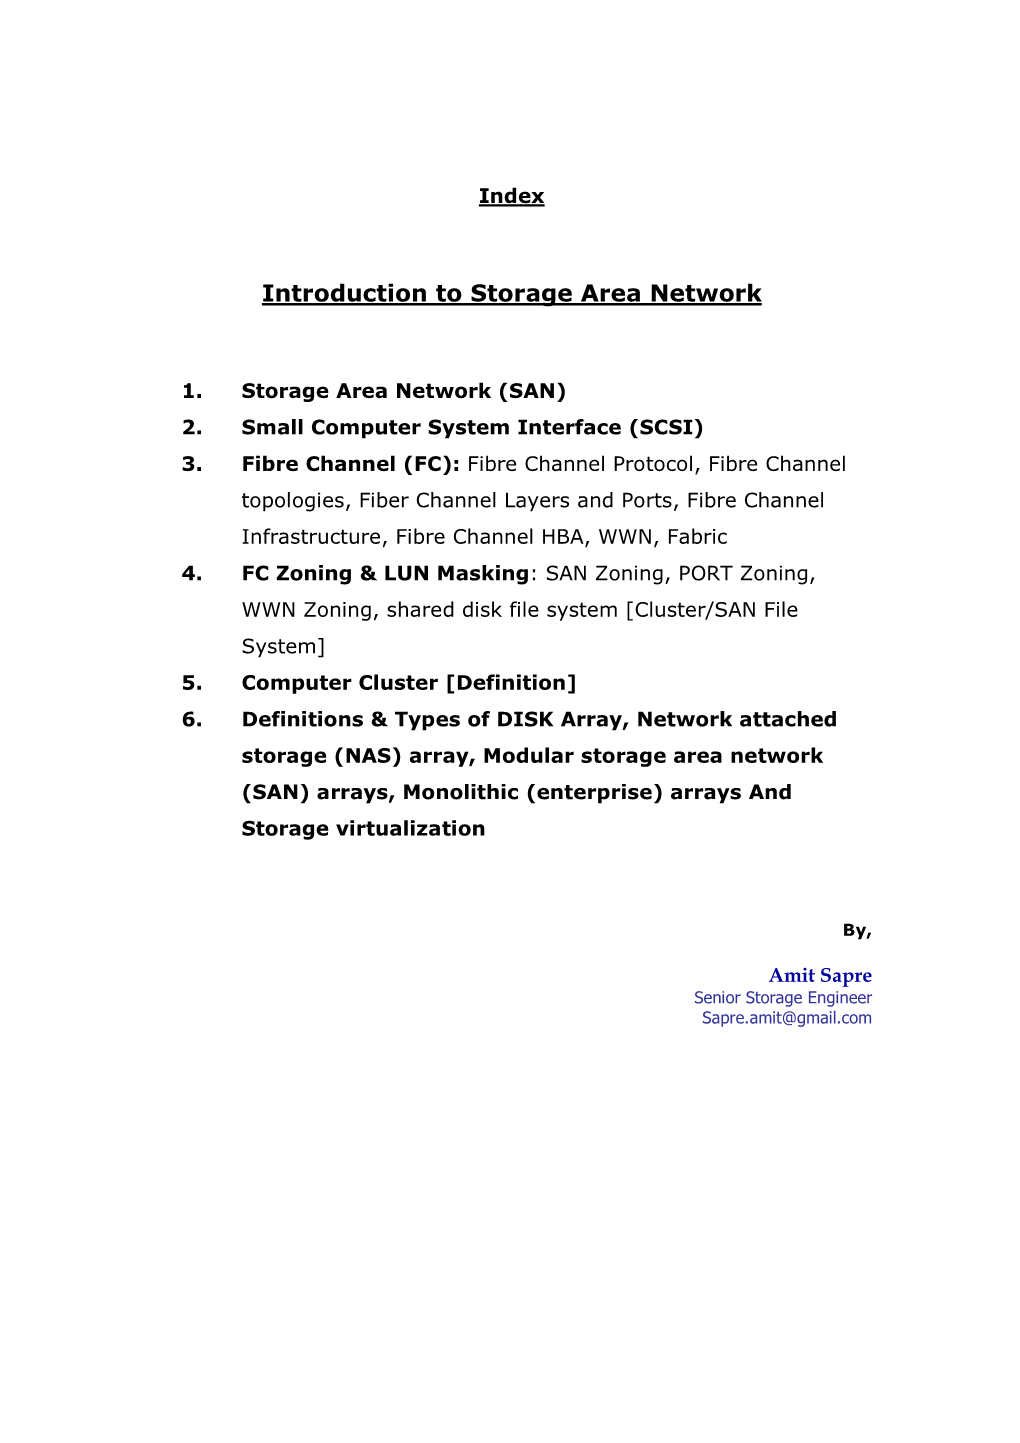 Introduction to Storage Area Network